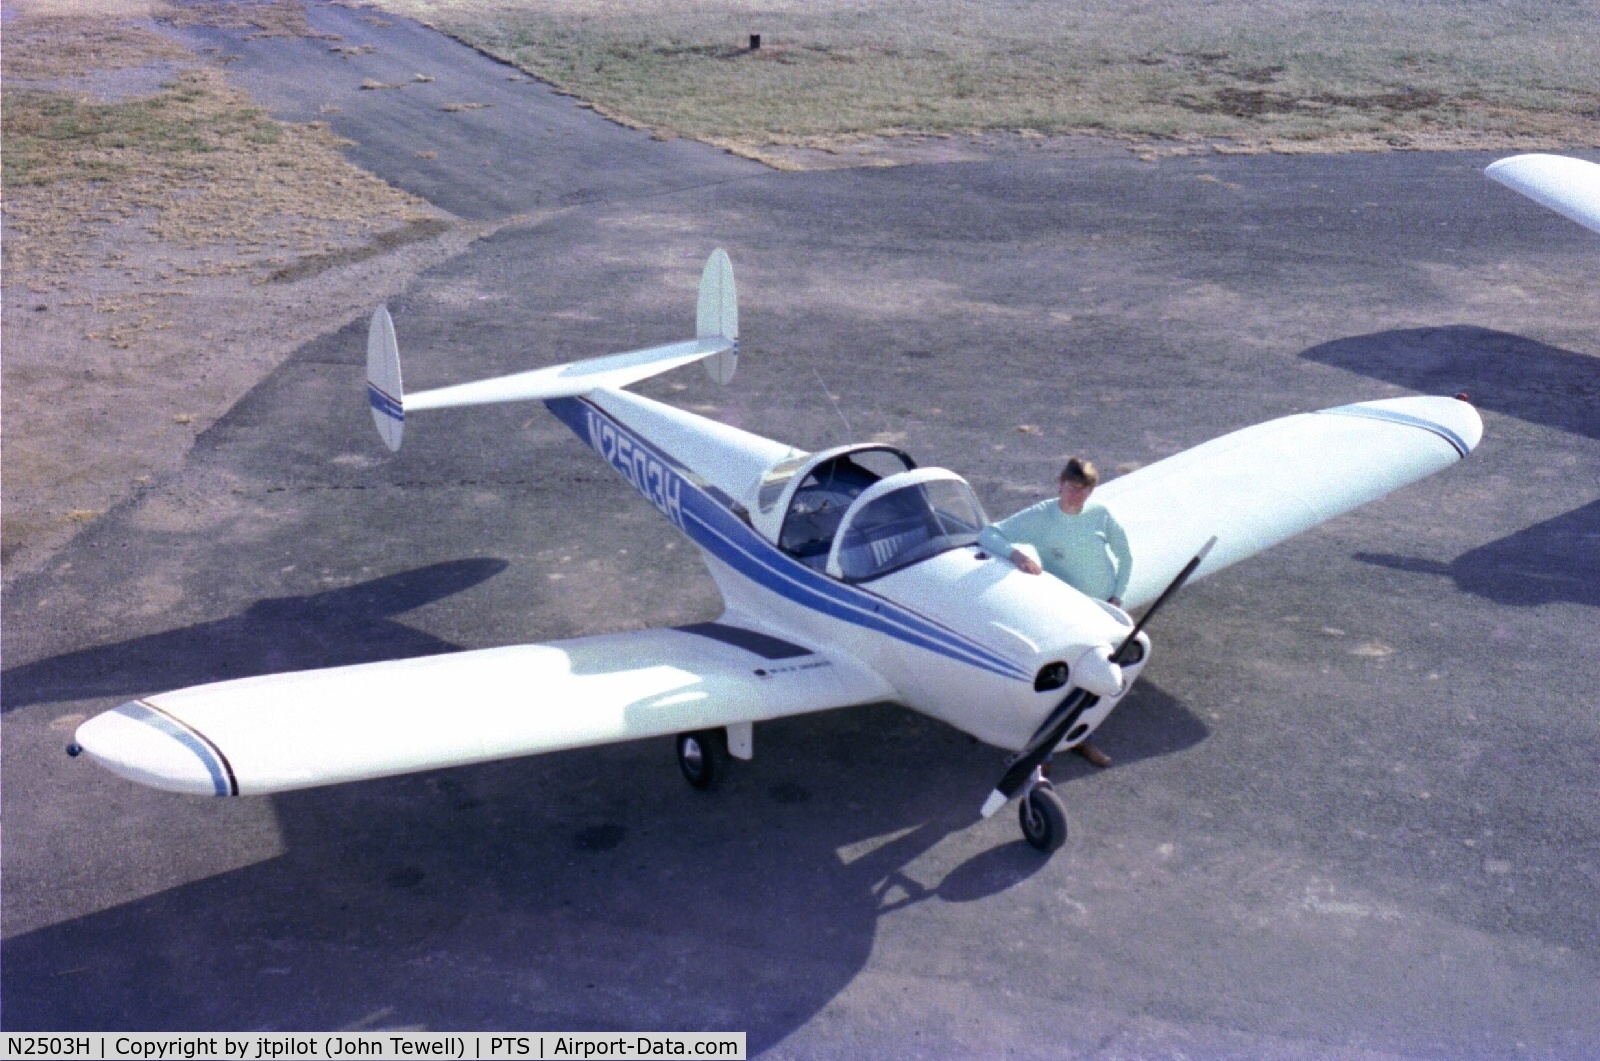 N2503H, 1946 Erco 415C Ercoupe C/N 3128, My better than new airplane. The Ercoupe was 23 years old at the time in 1969. I won several awards with this airplane and is was featured in the Oct. 1973 Private Pilot magazine